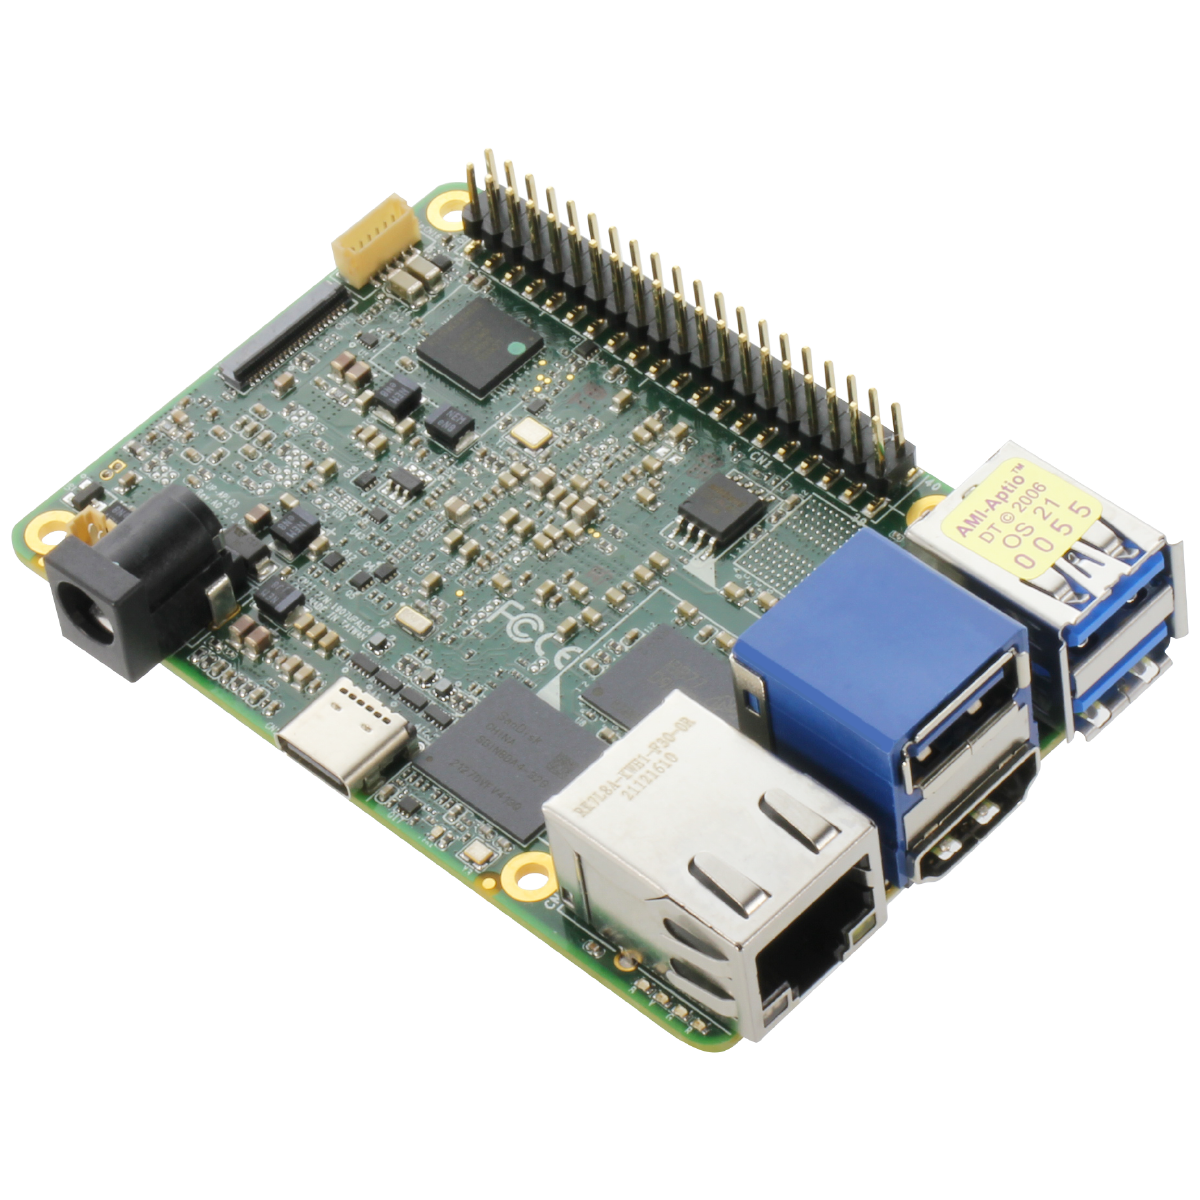 The new UP 4000 aims to Bridge the Gap to the Next Generation UP Board